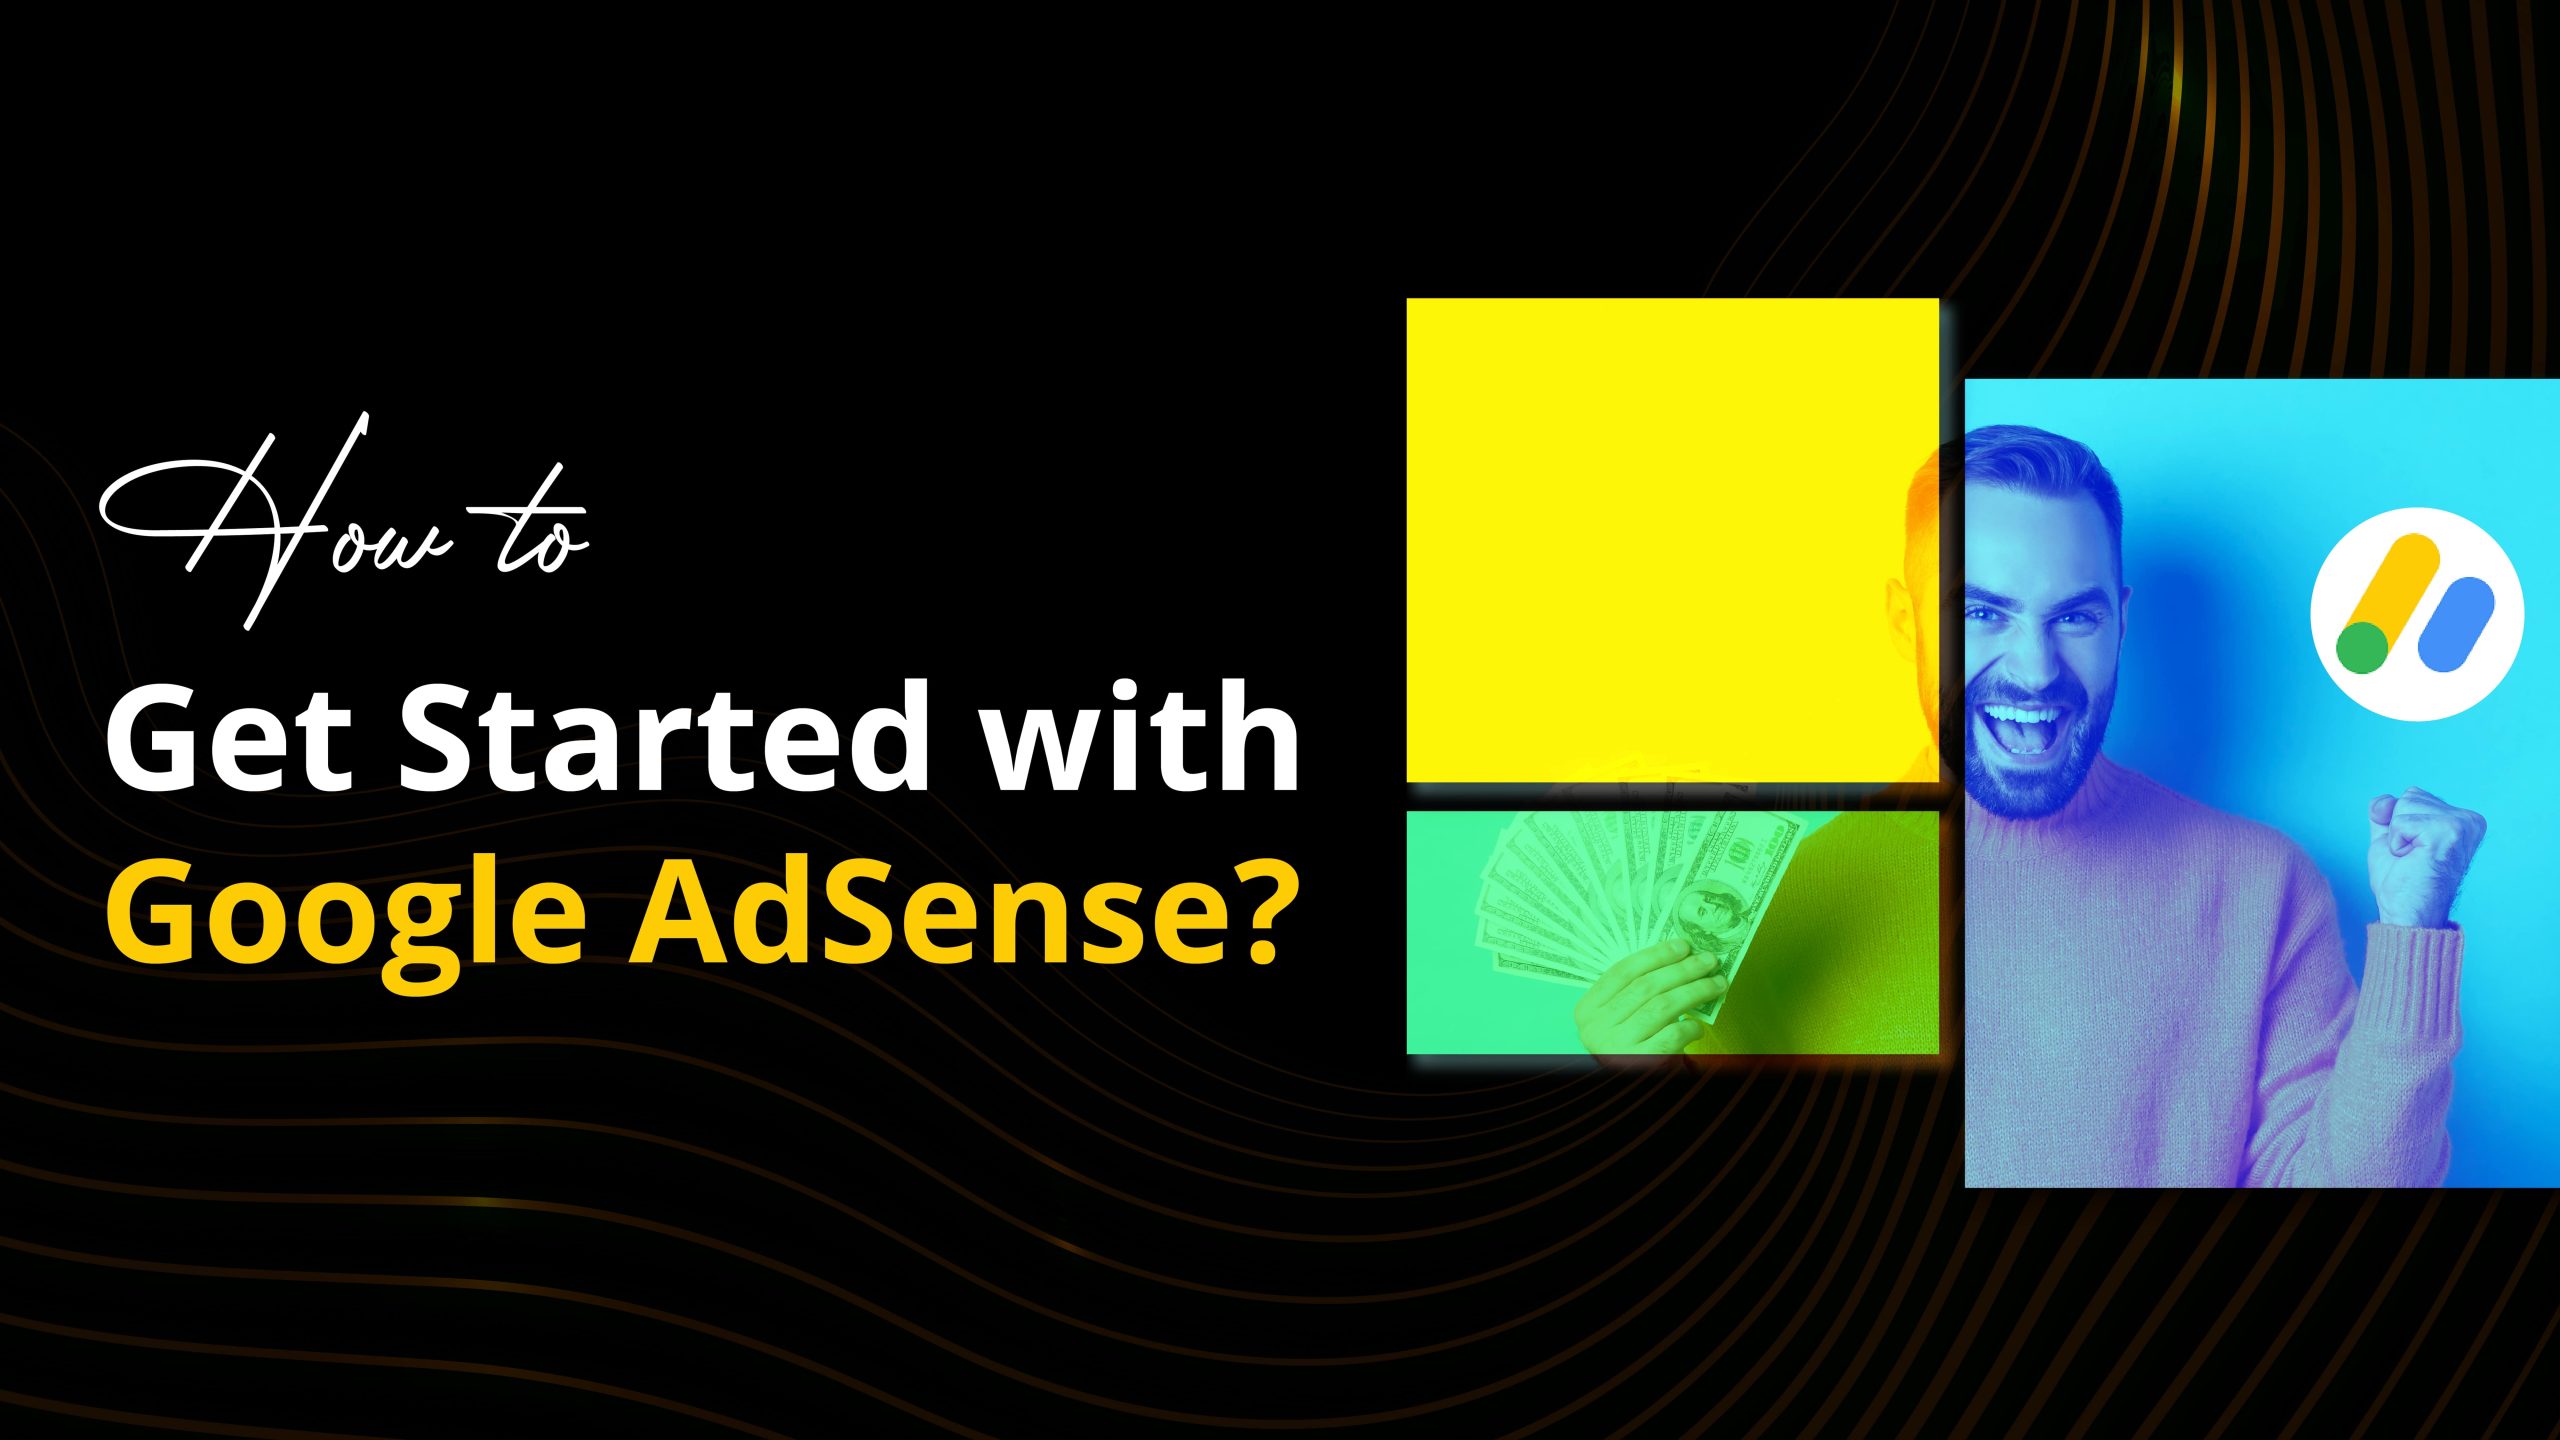 How to Get Started with Google AdSense in 3 Easy Steps?